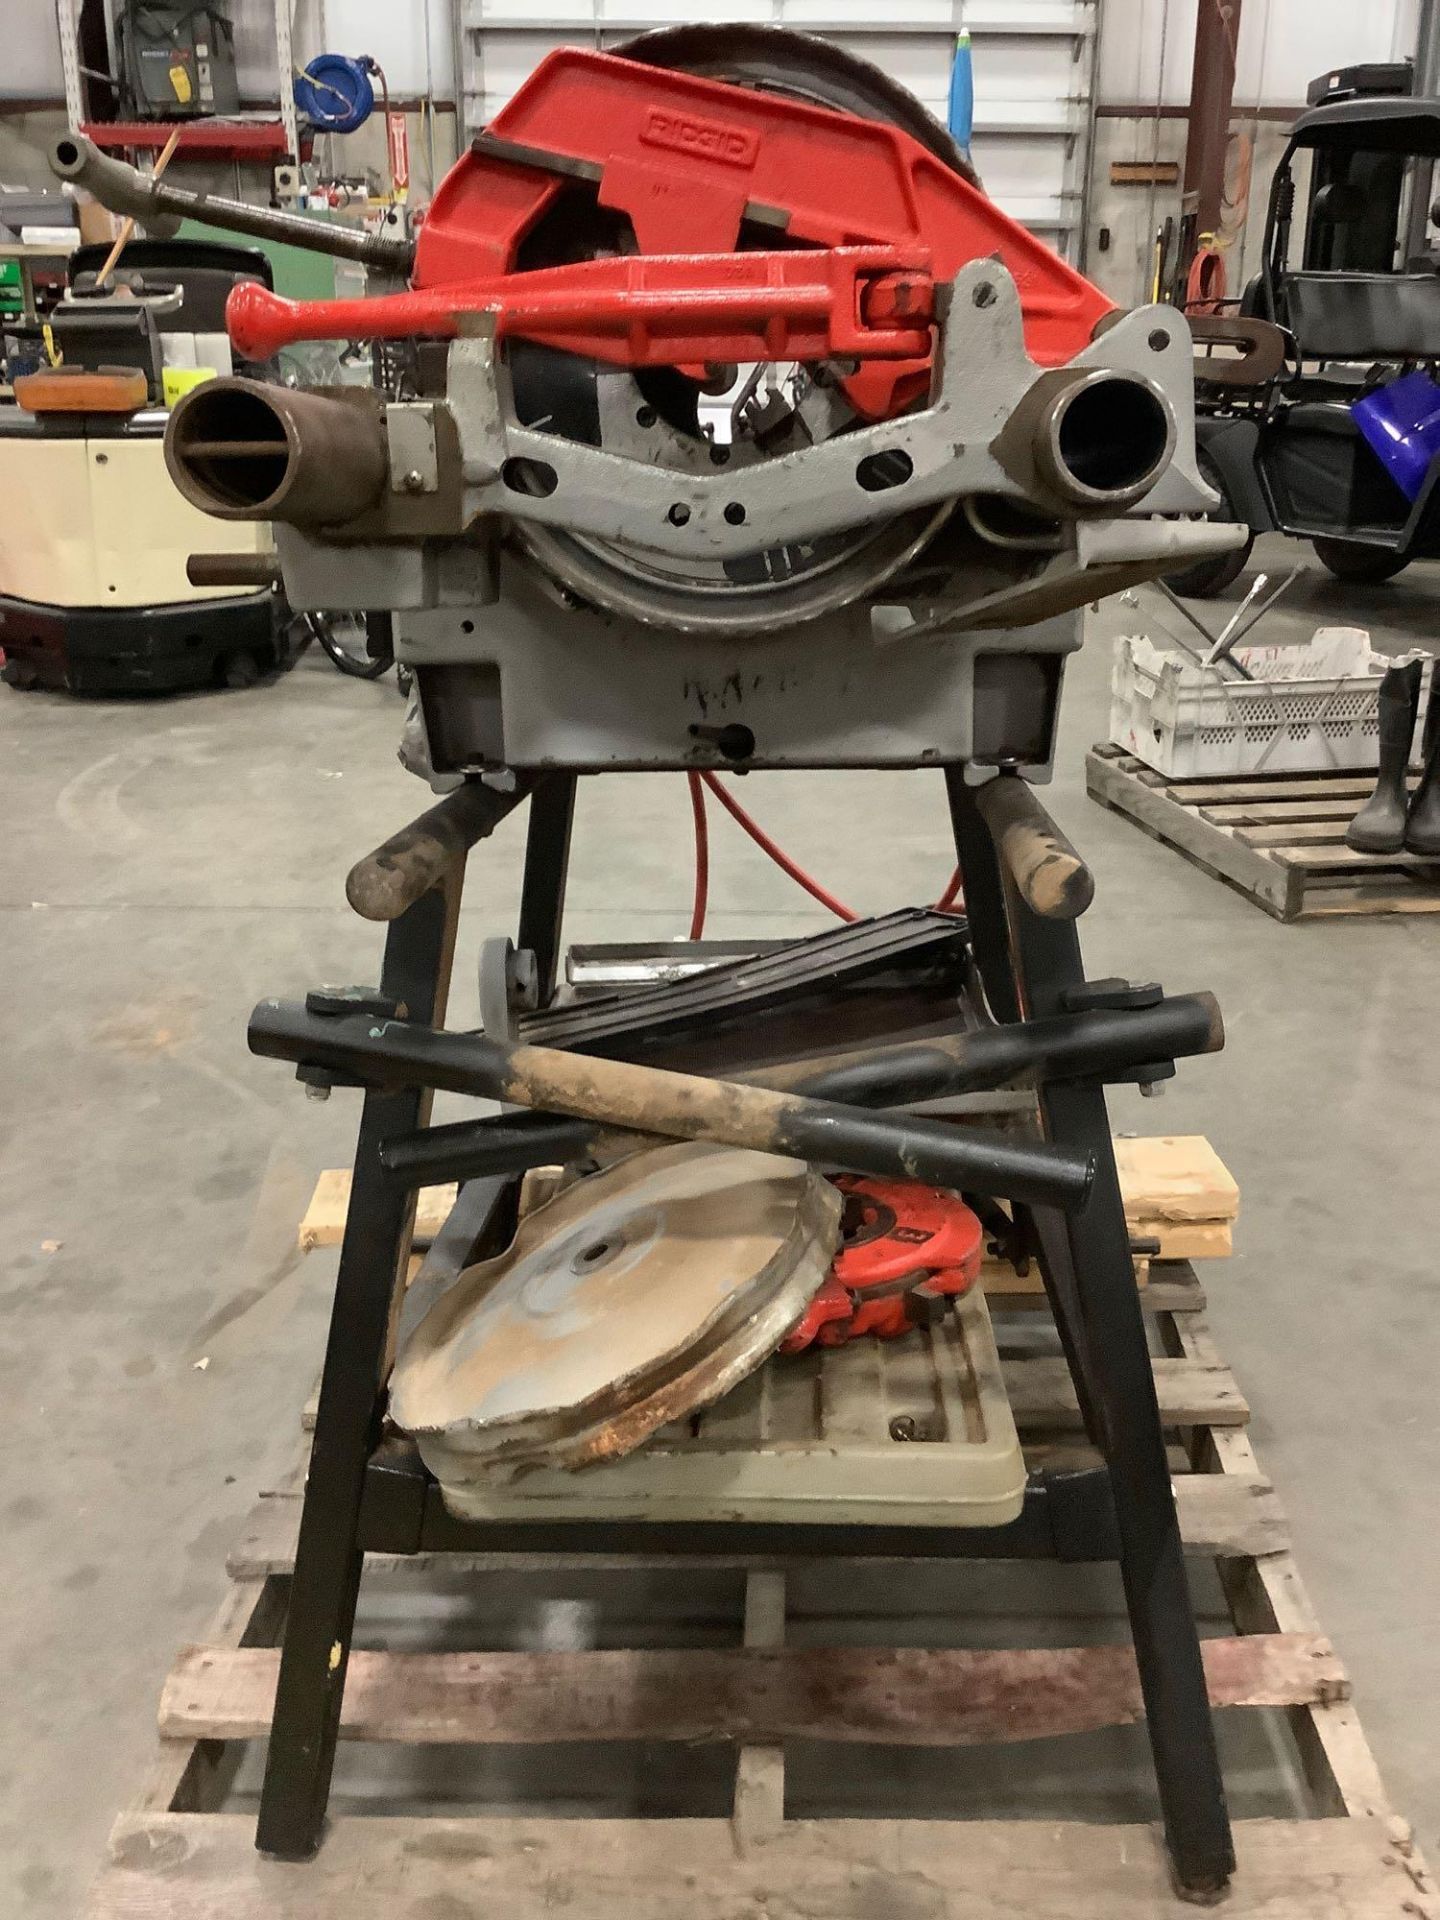 2018 ELECTRIC RIDGID PIPE THREADER MODEL 1224 WITH STAND, APPROX 120 VOLTS,APPROX AMP 15,APPROX HZ 6 - Image 7 of 8